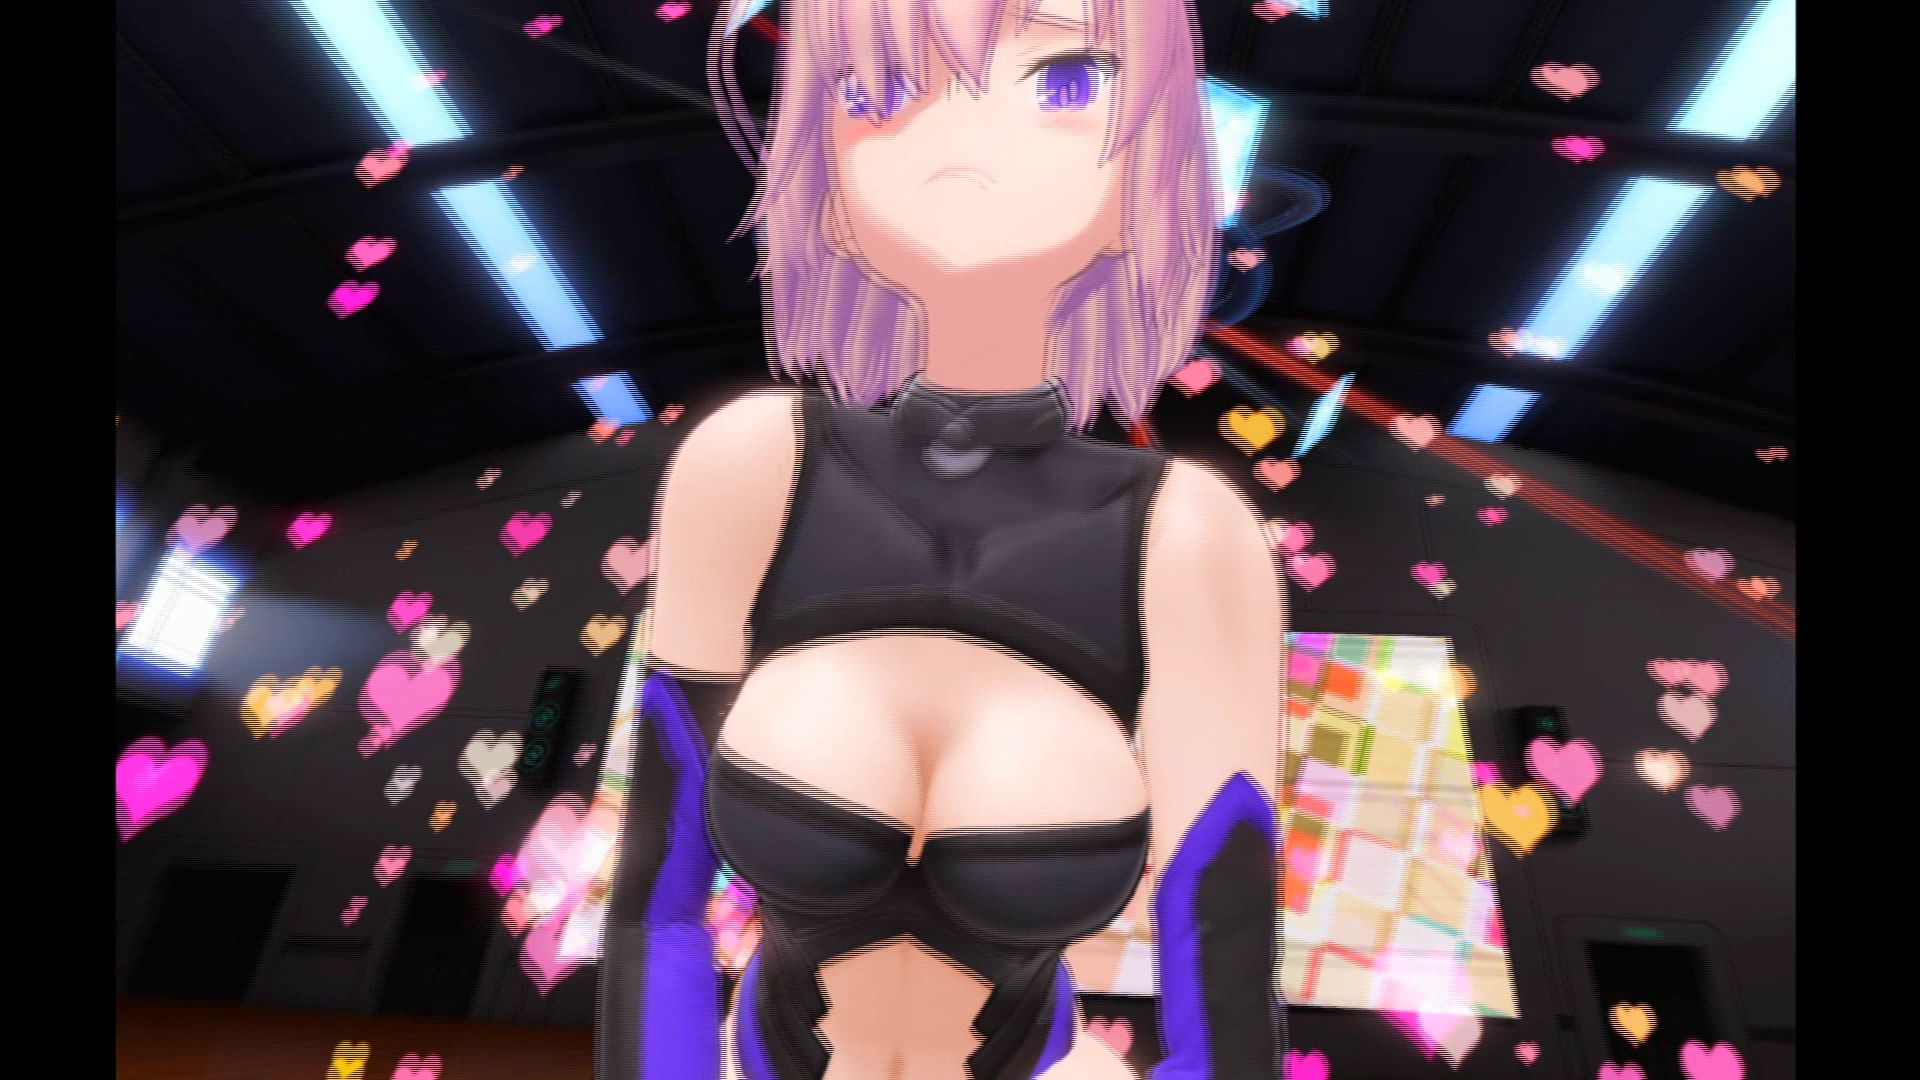 [Fate/Grand order VR] Maschsee underwear and breast! The underwear of the alto rear, too! 22